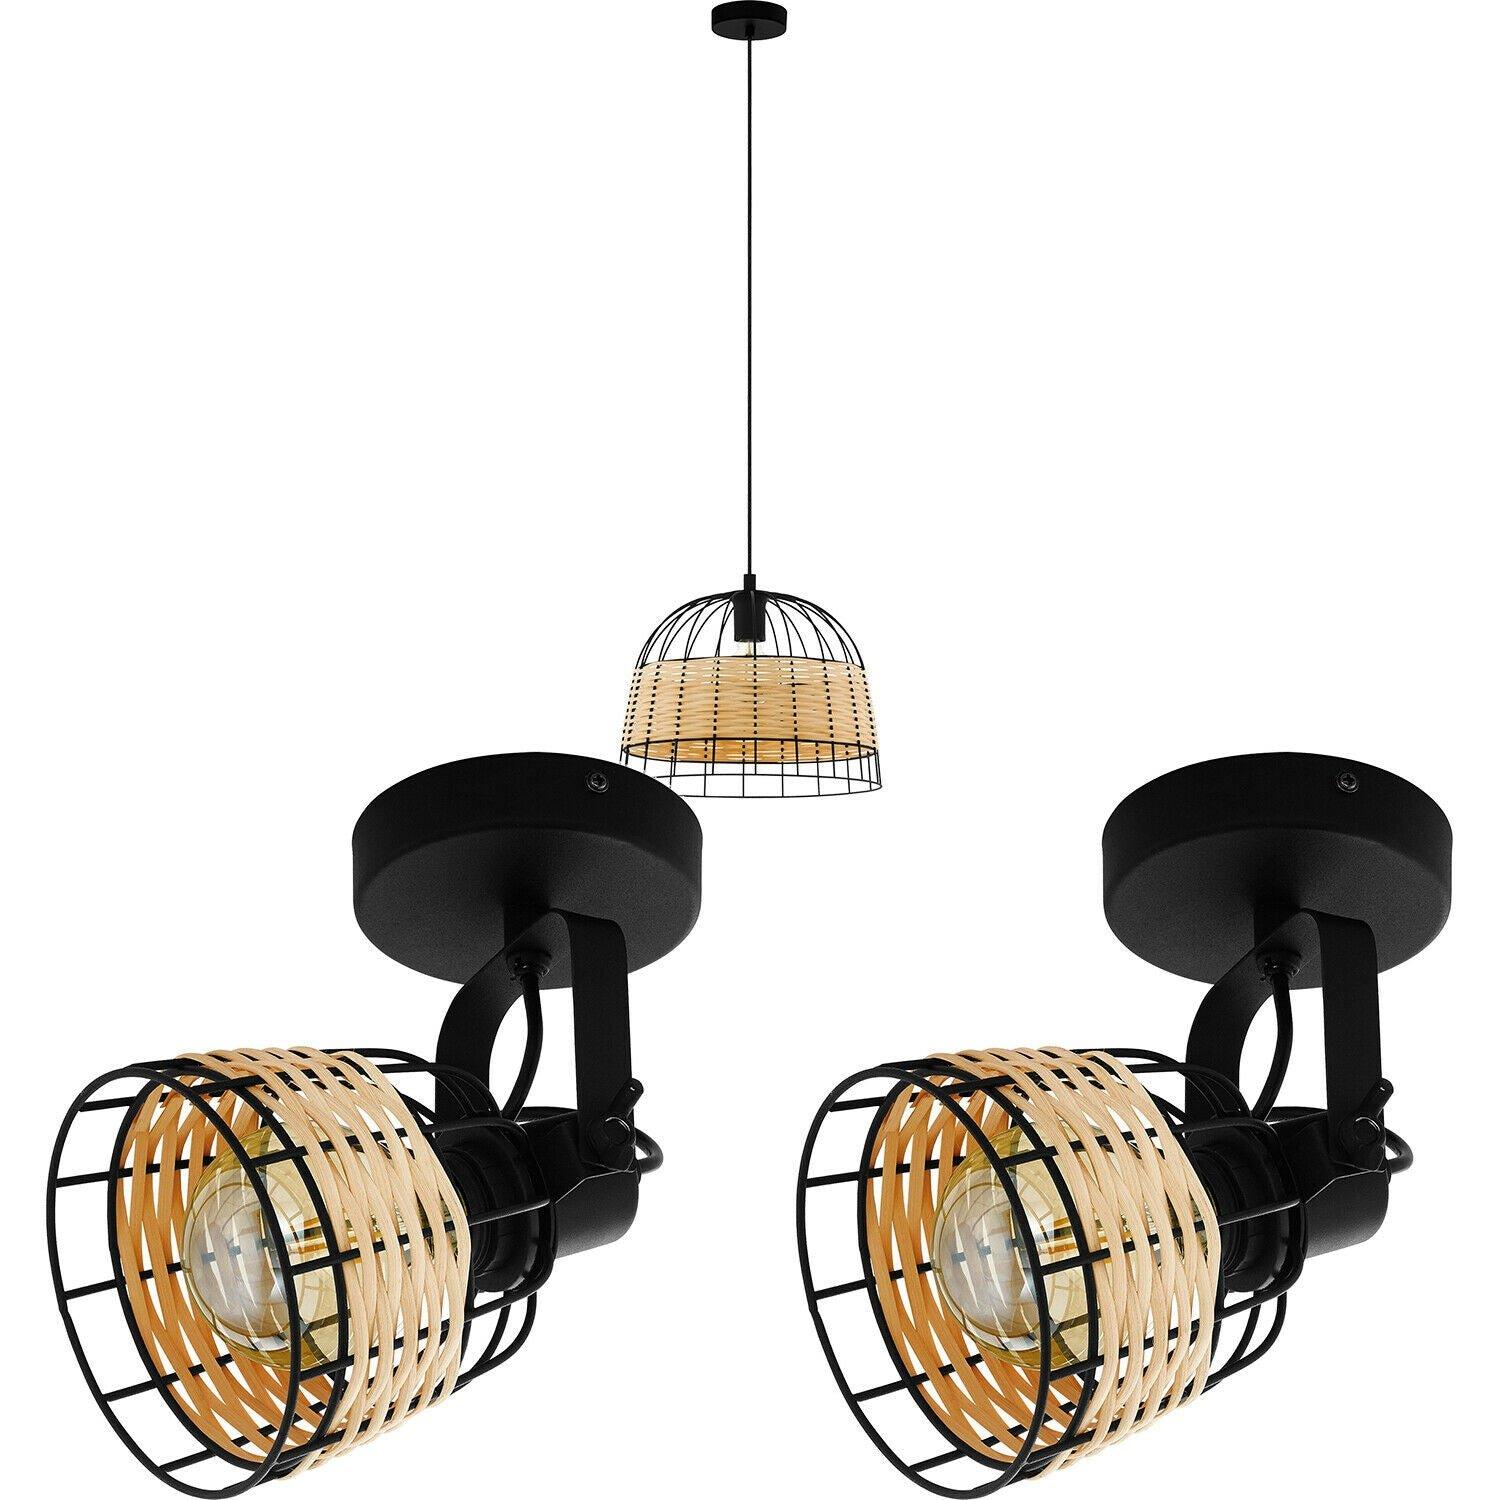 Ceiling Pendant Light & 2x Matching Wall Lights Black Wire & Wicker Wood Lamp